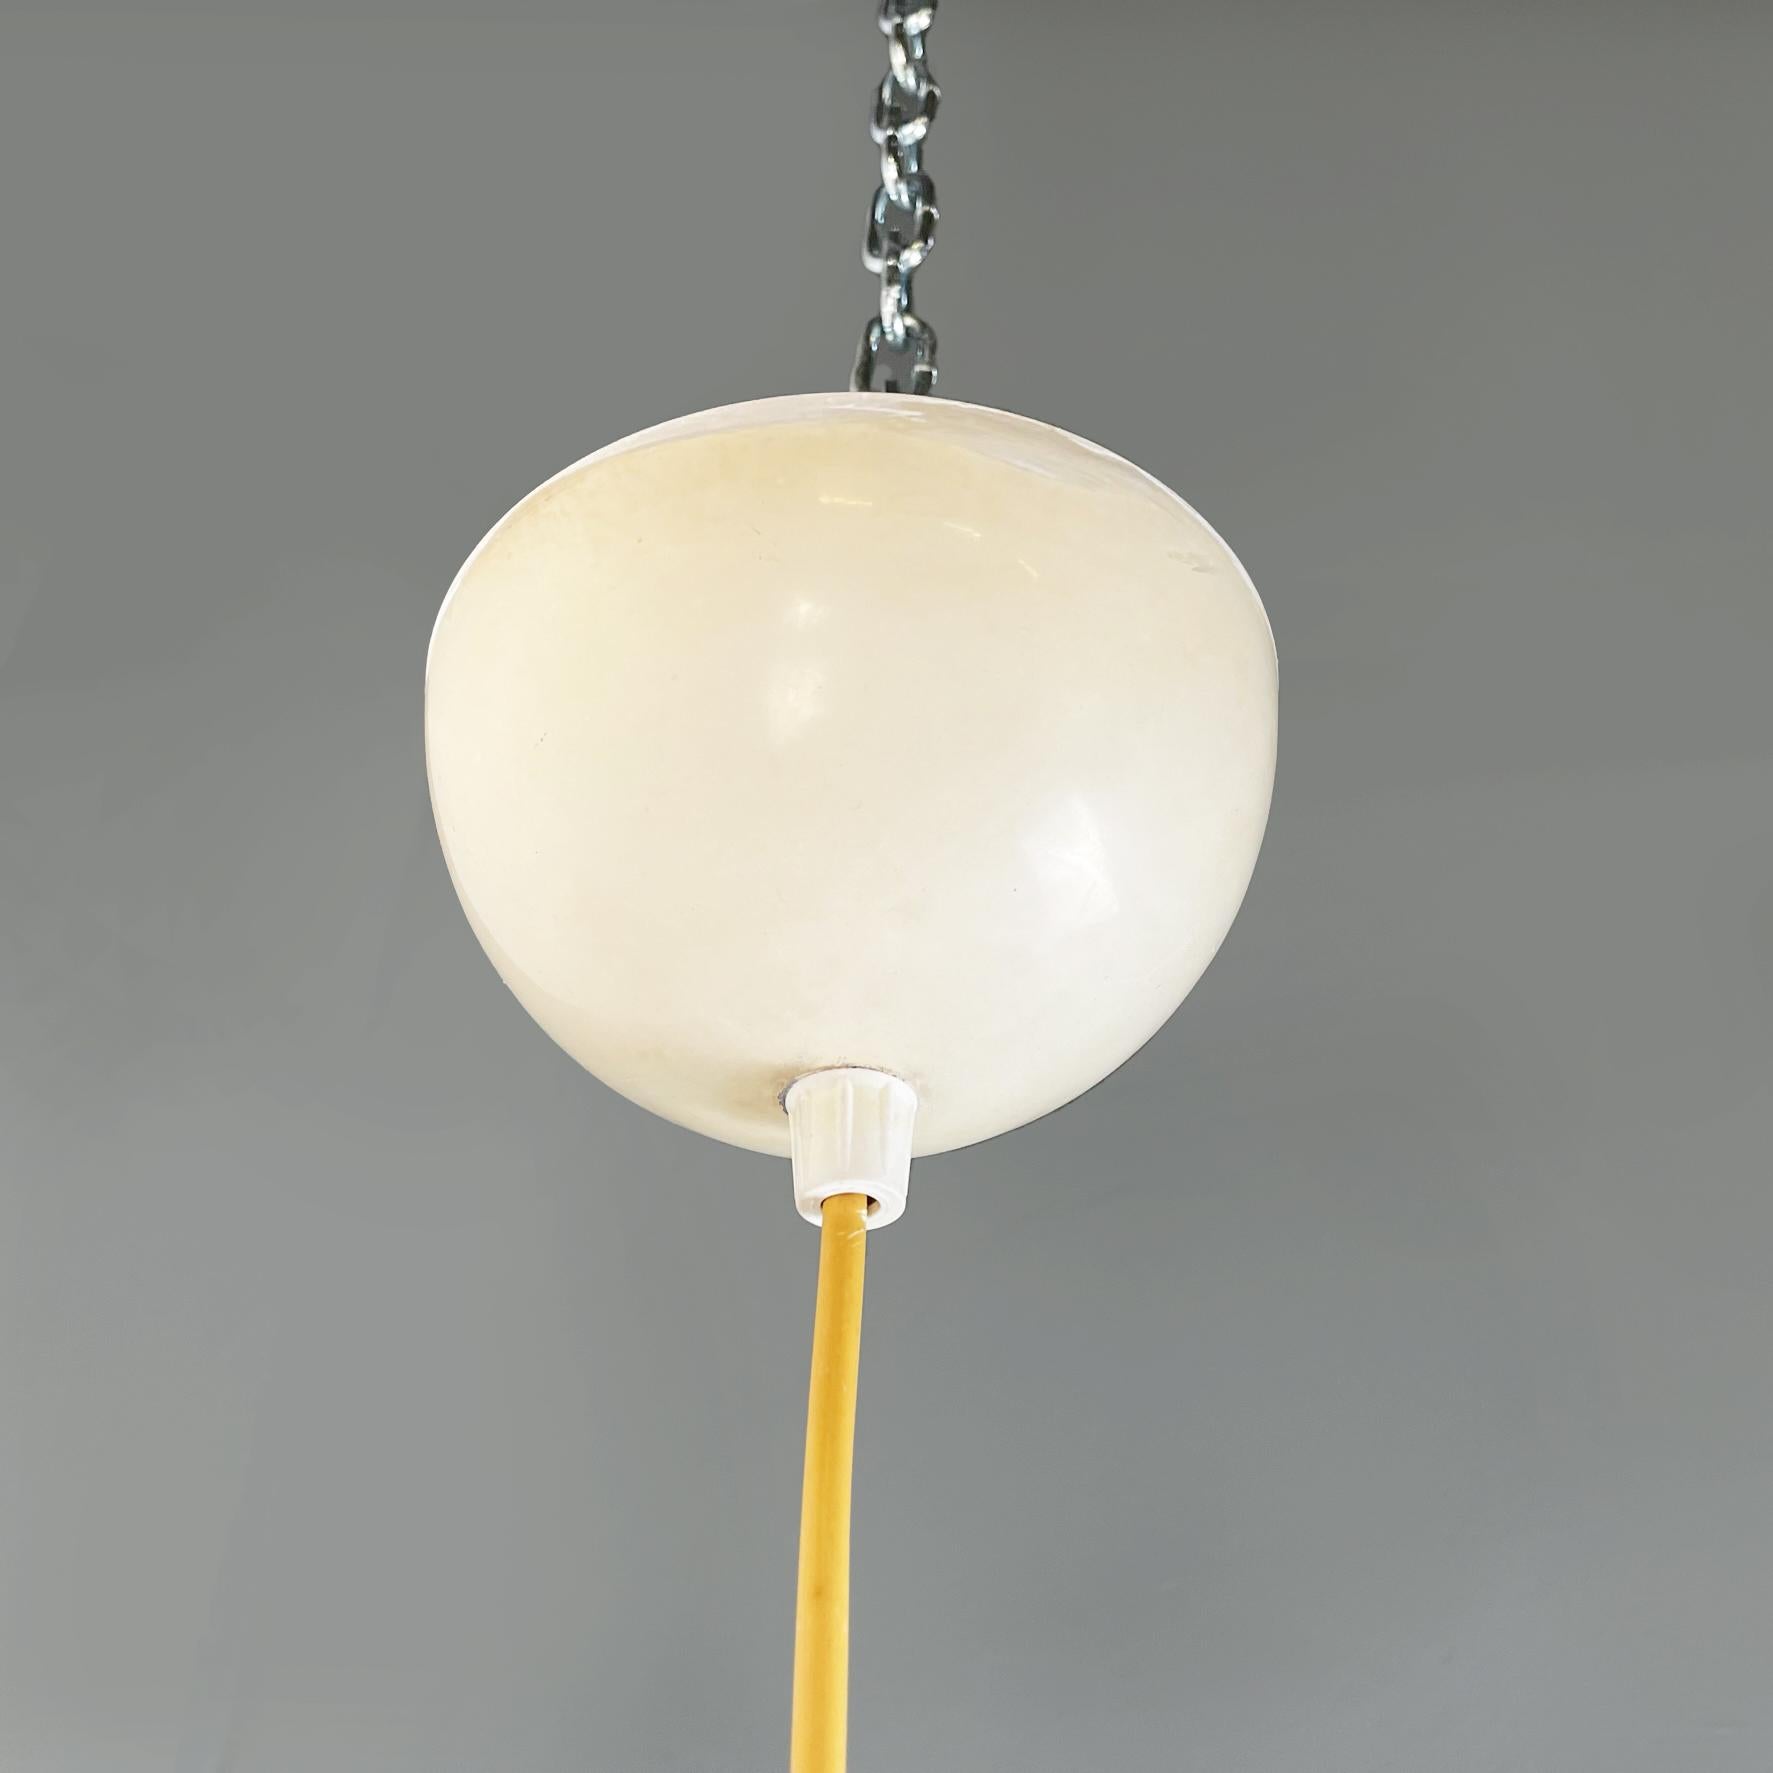 Italian Mid-Century Metal Suspension Lamp Relemme by Castiglioni for Flos, 1970s 5